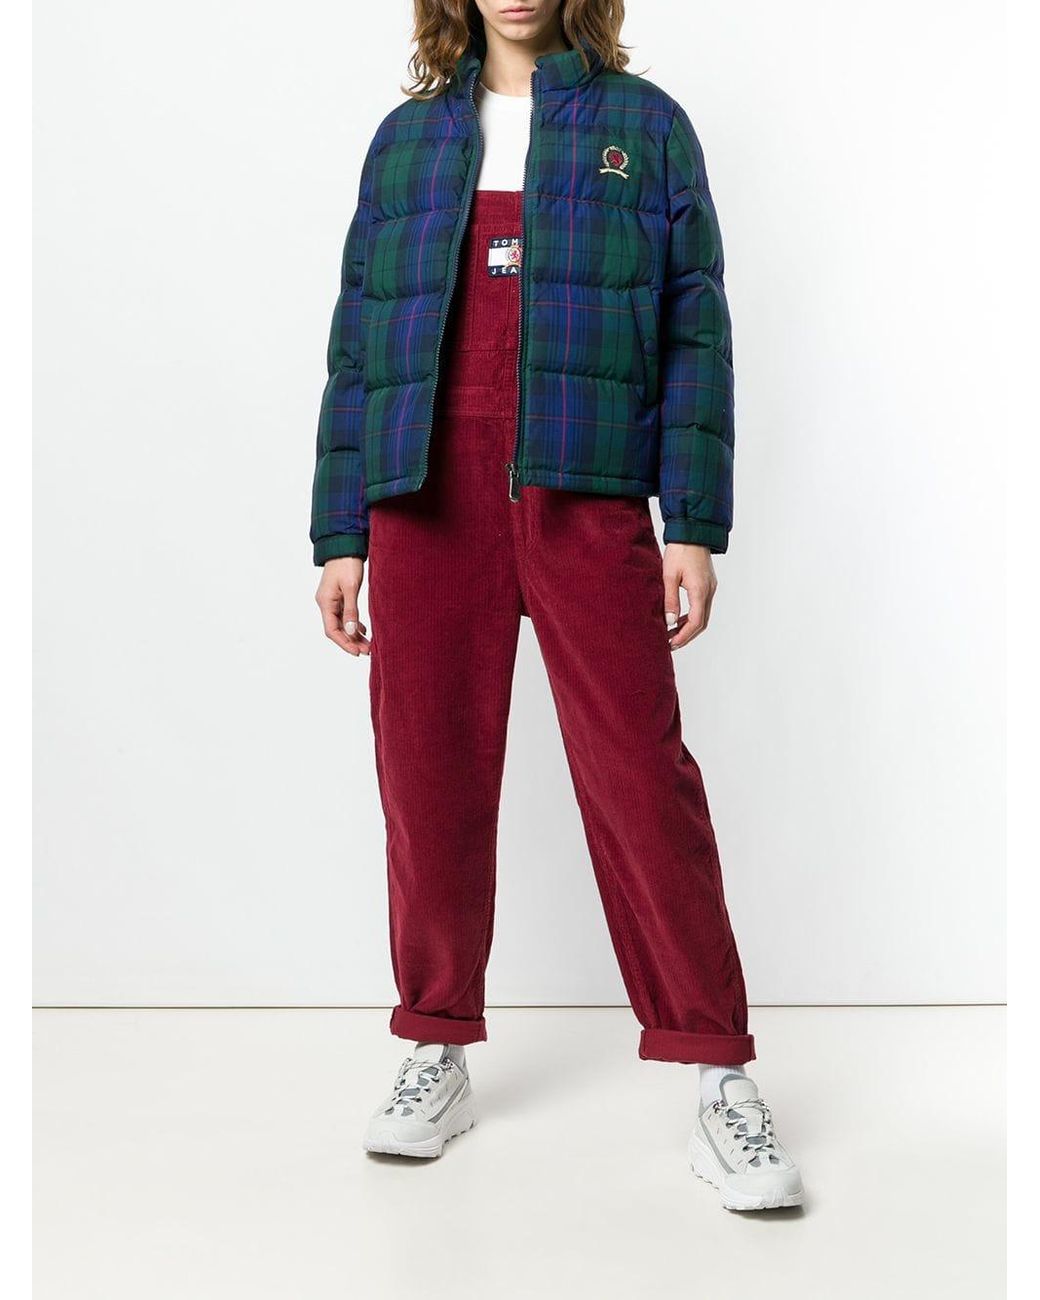 Tommy Hilfiger Cotton Plaid Puffer Jacket in Blue | Lyst